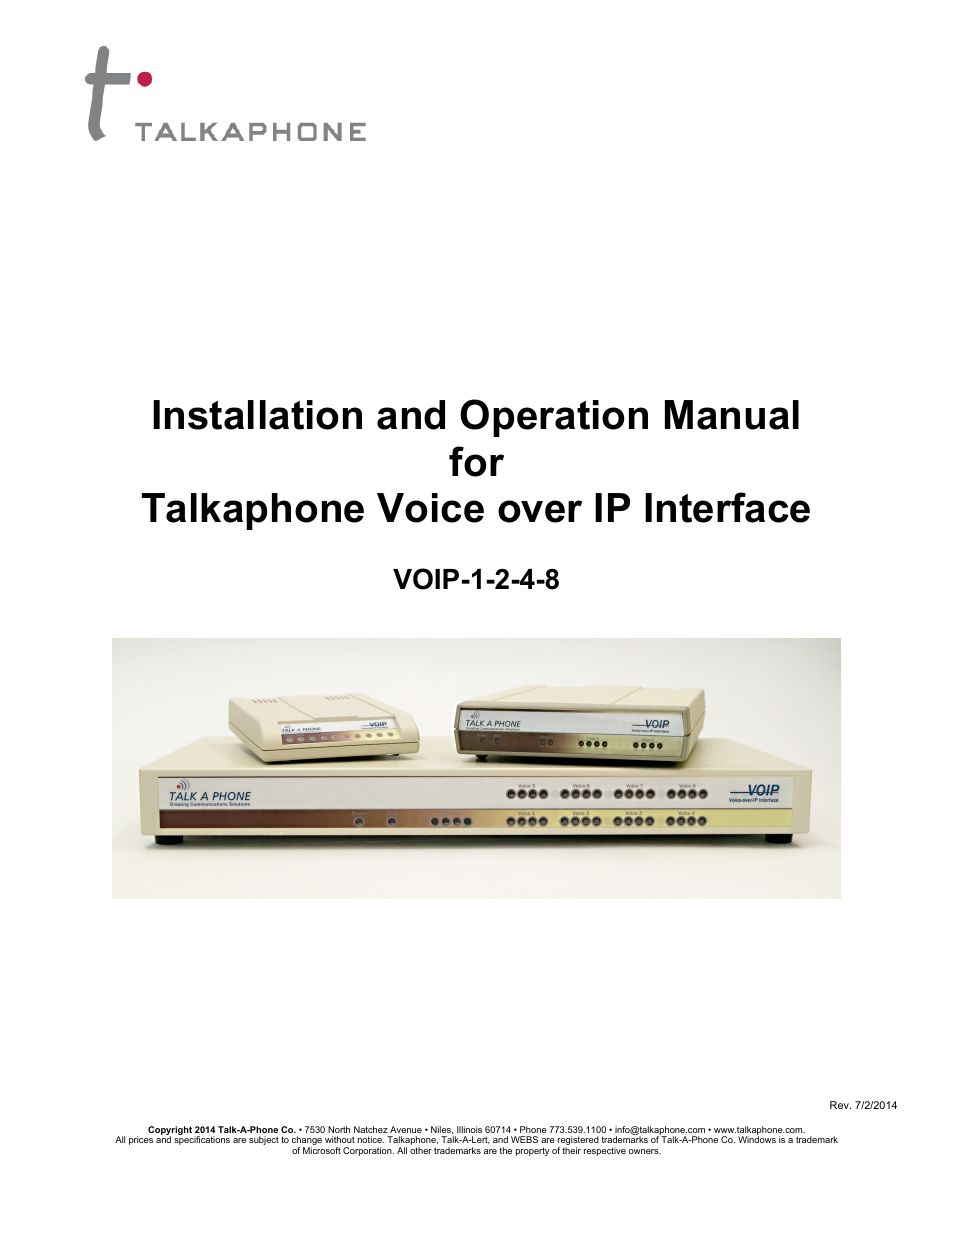 VOIP-8 VoIP Interface (8 channels)